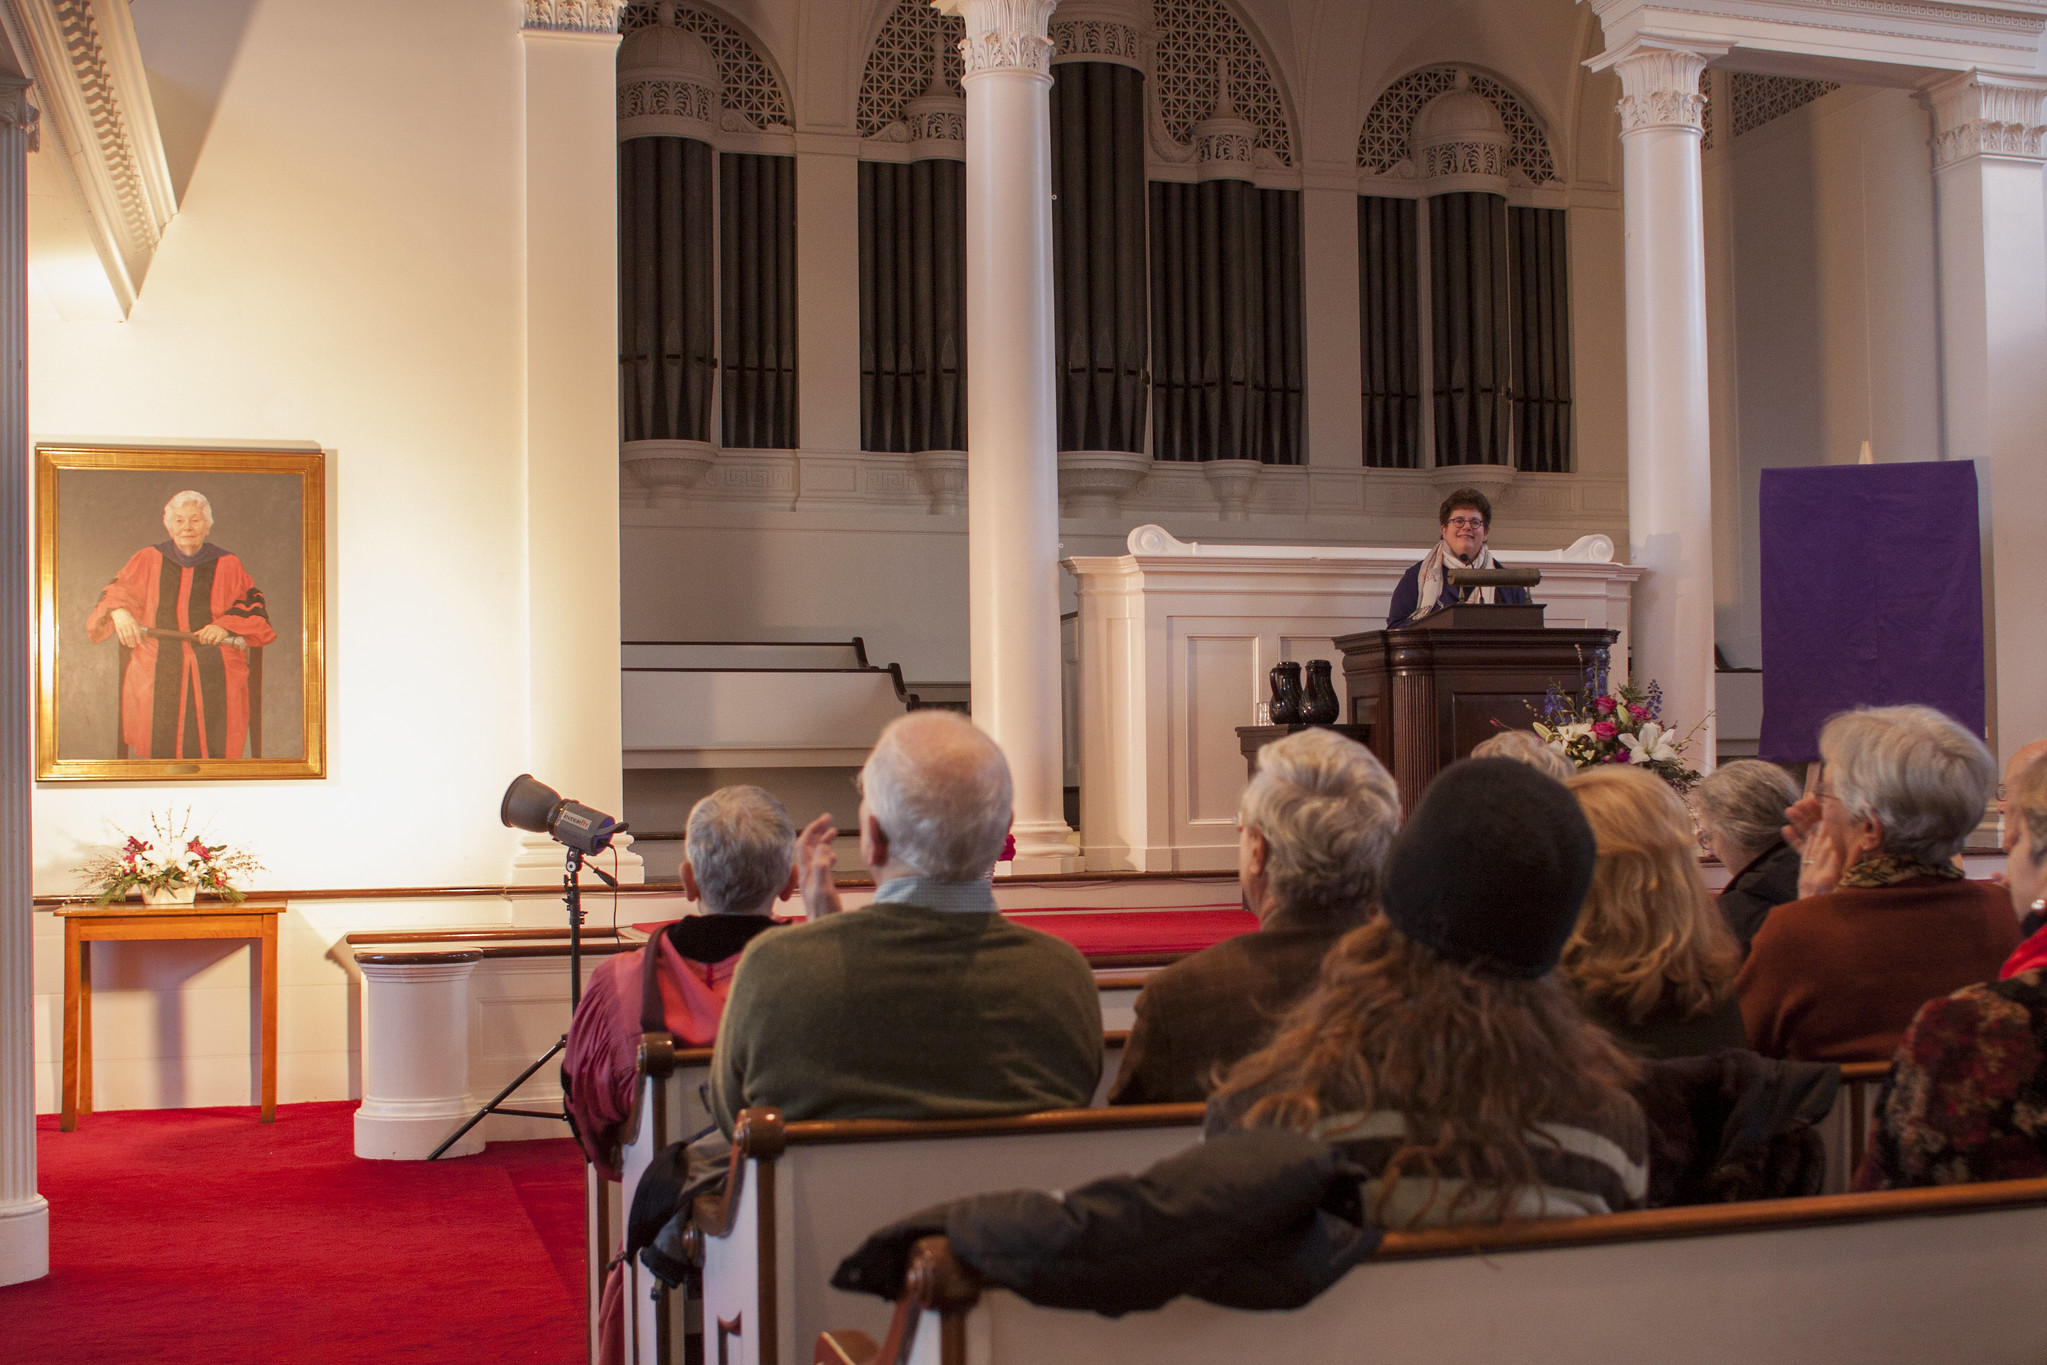 Biddy Martin speaks in Johnson Chapel with Rose Olver portrait on the wall